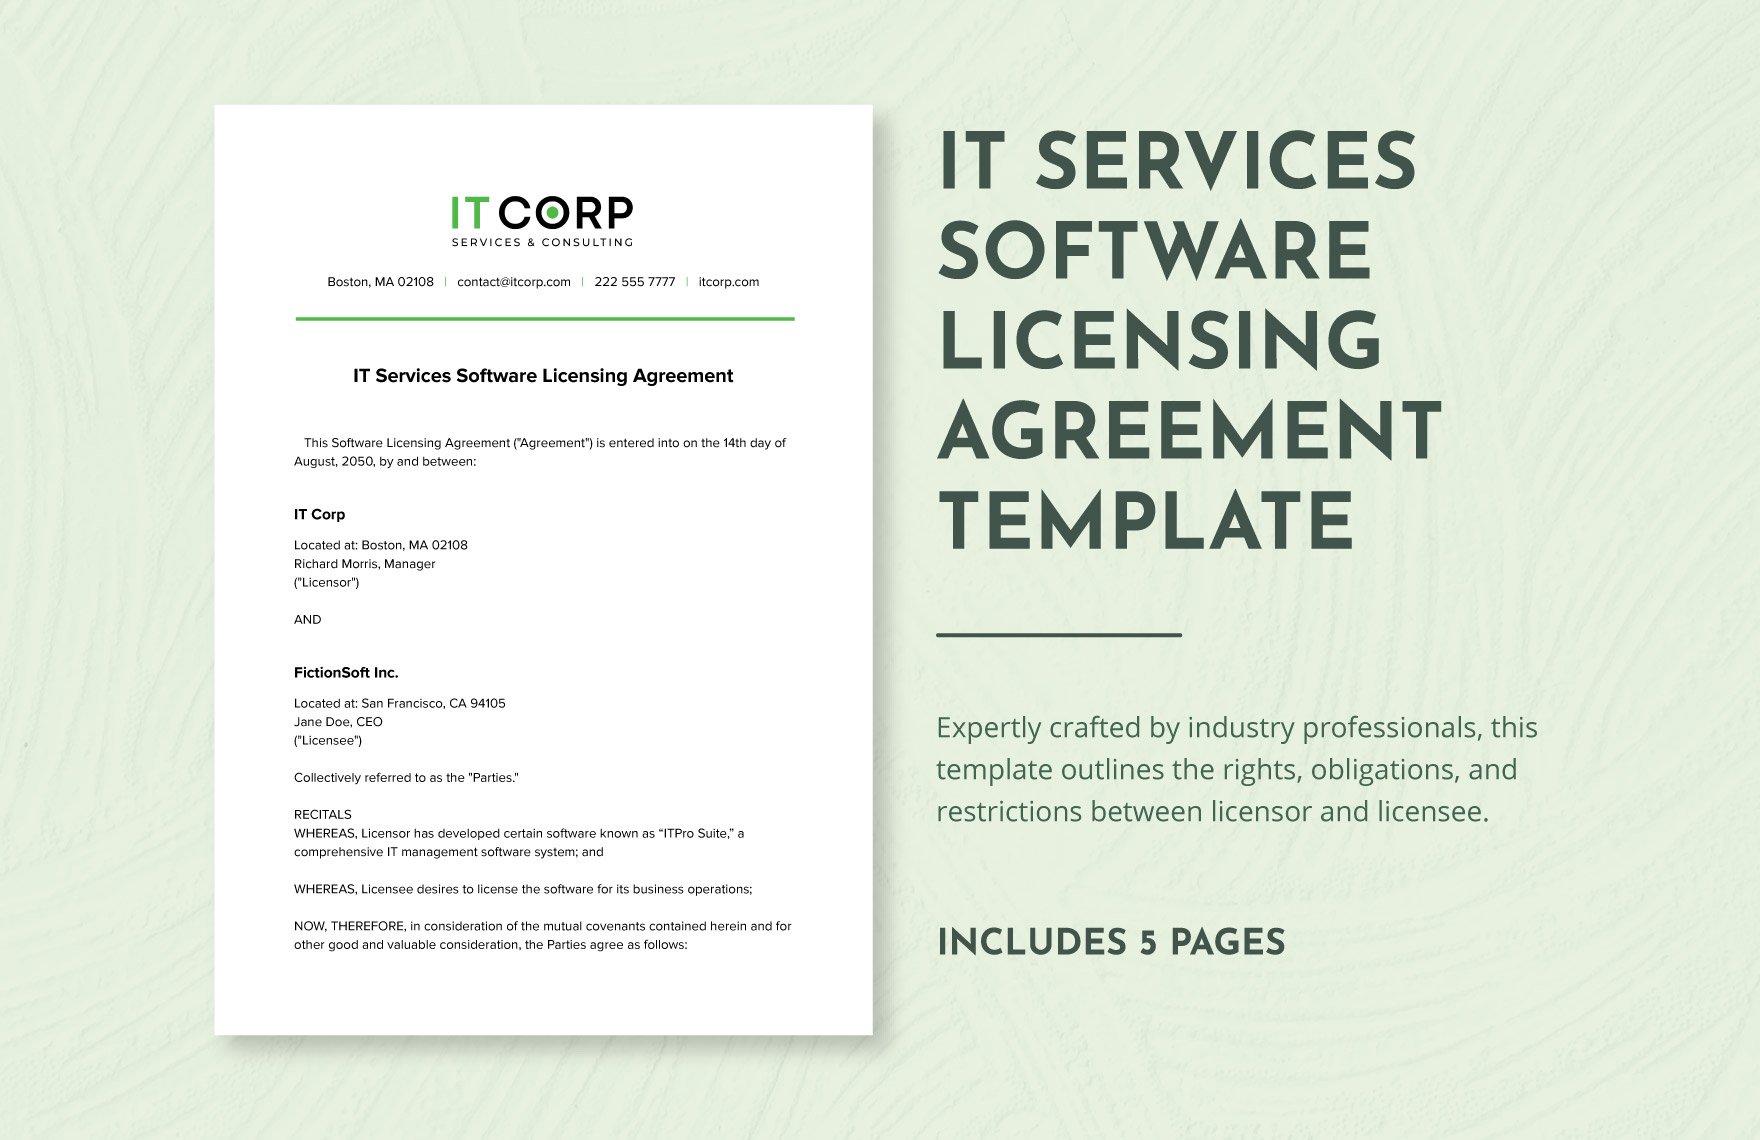 IT Services Software Licensing Agreement Template